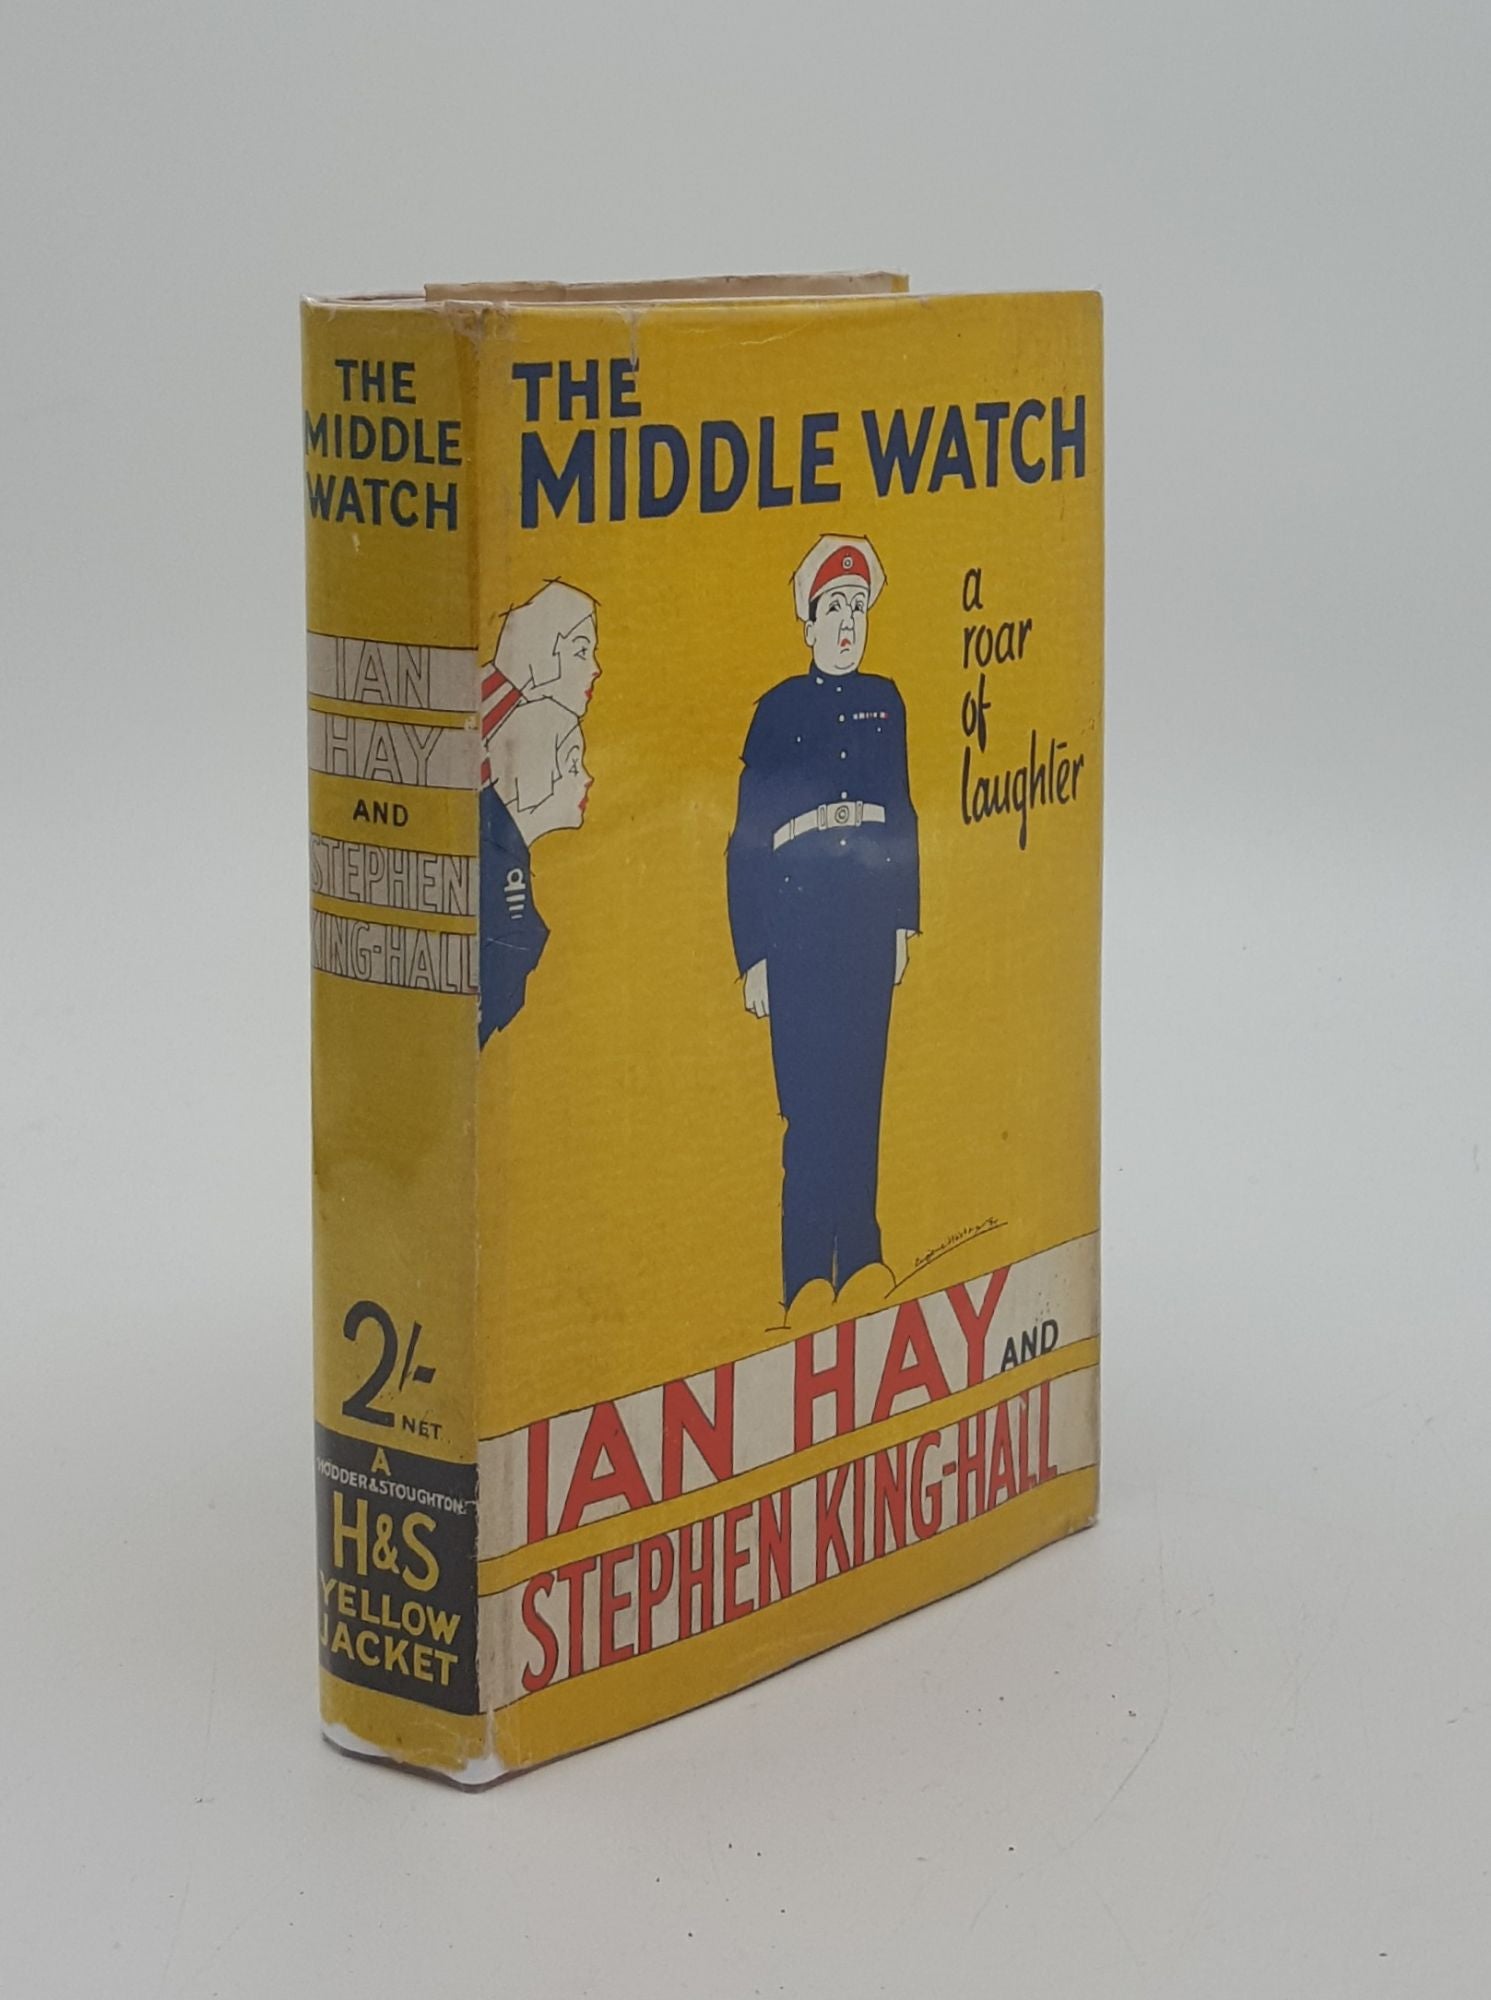 HAY Ian, KING-HALL Stephen - The Middle Watch